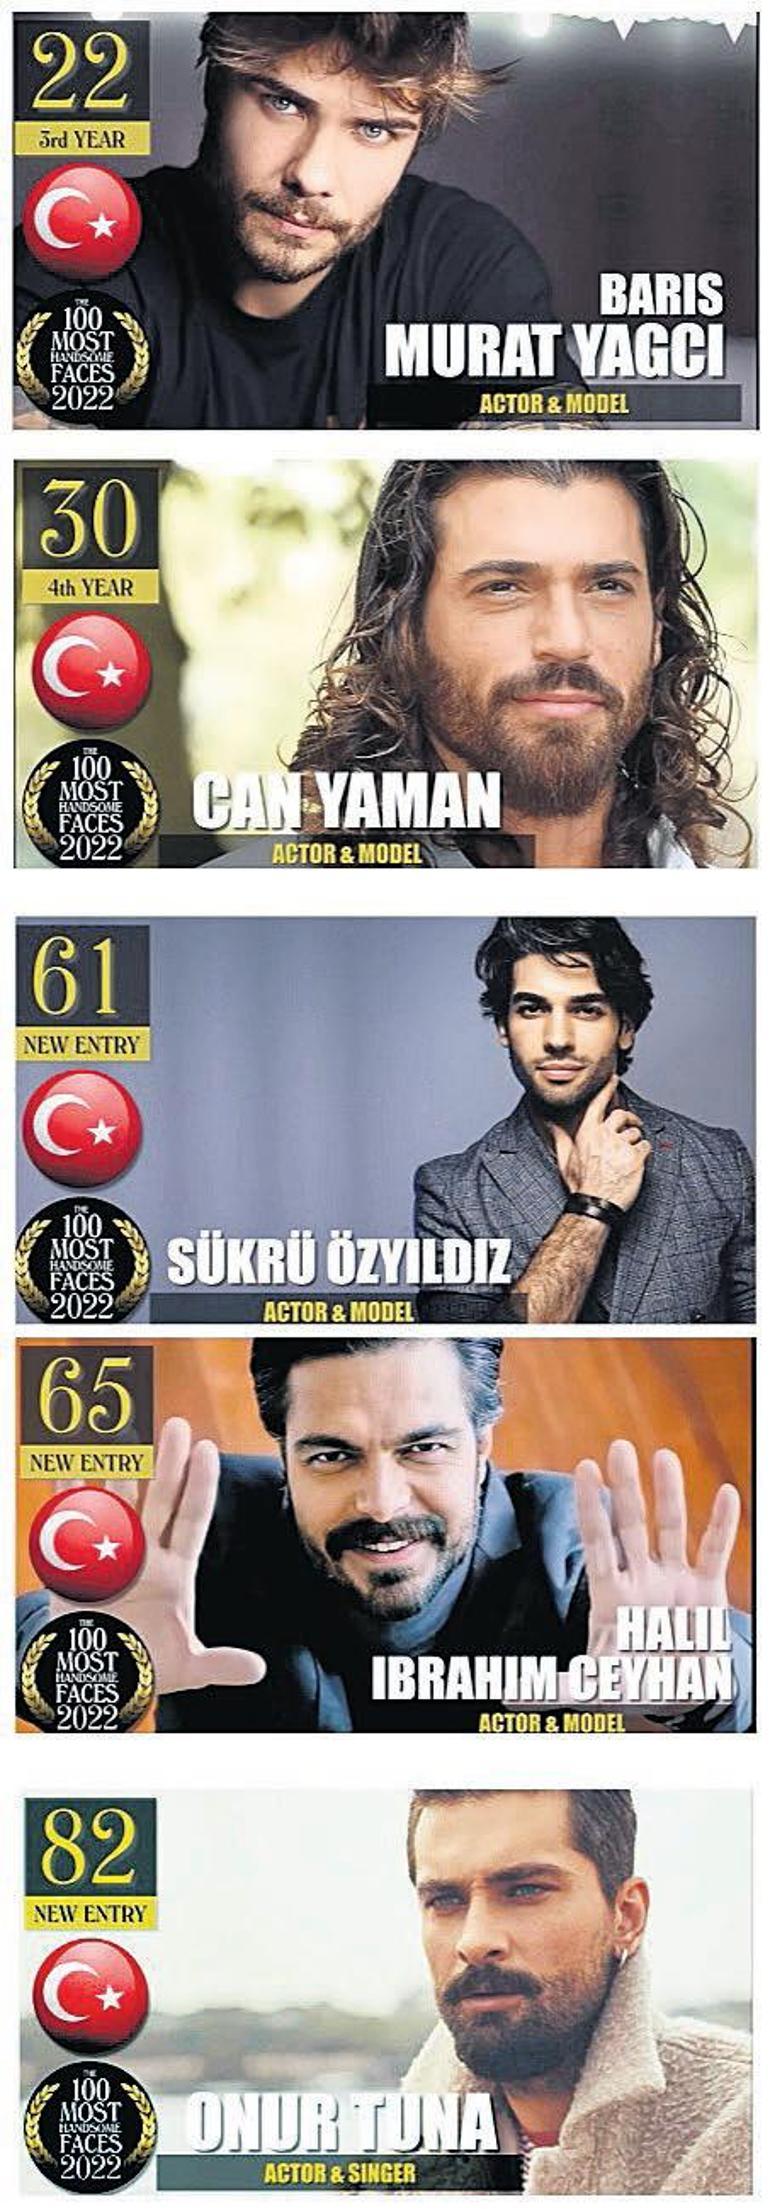 HOW MANY OF THE '100 BEAUTIFUL FACES' ARE FROM TURKEY